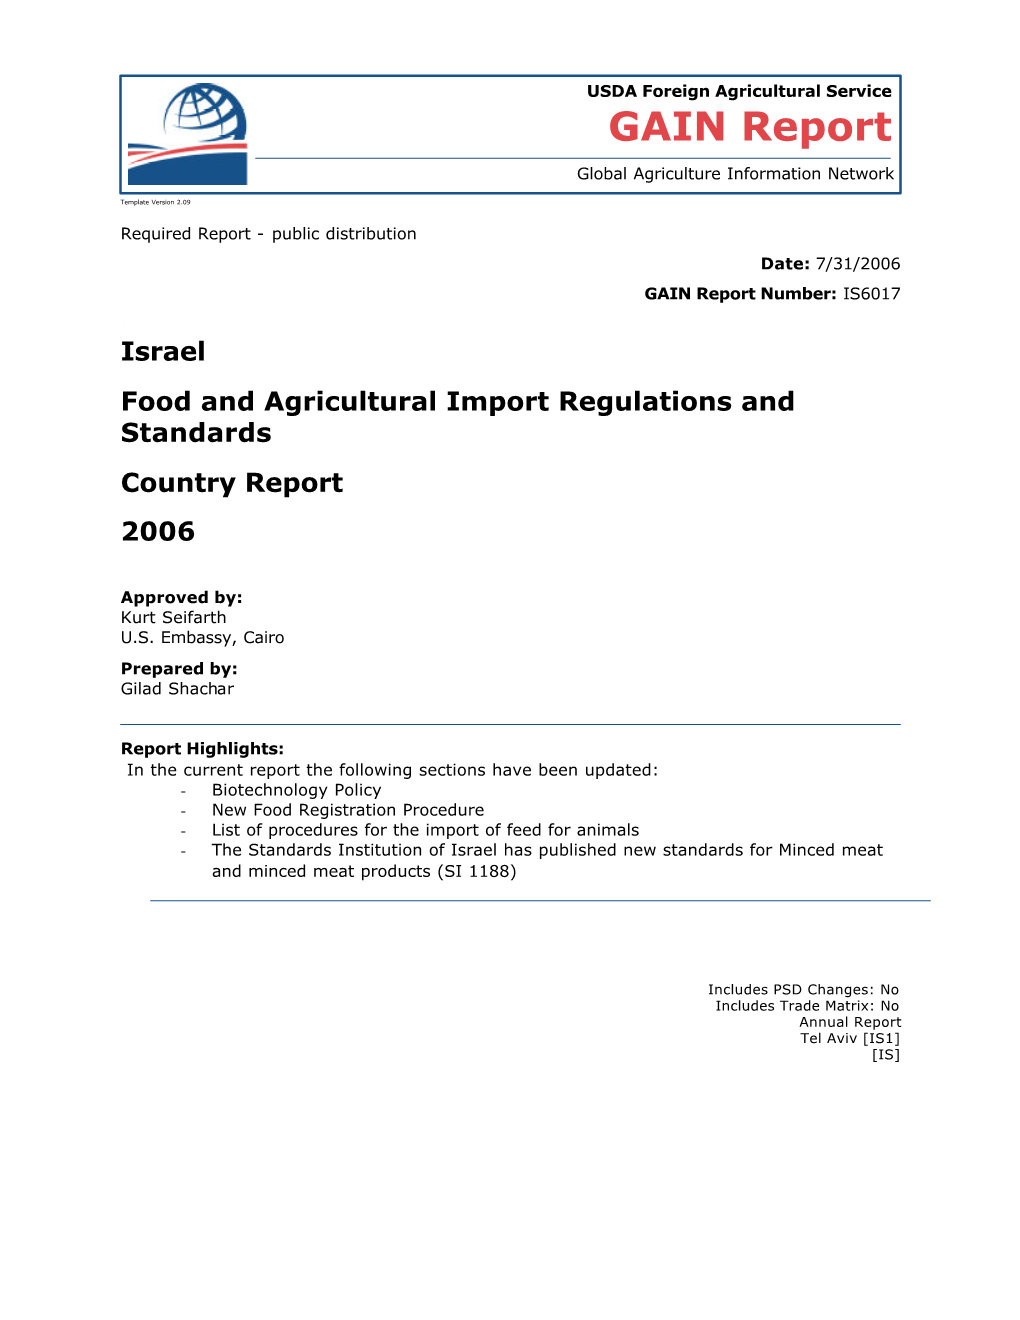 Food and Agricultural Import Regulations and Standards Country Report 2006